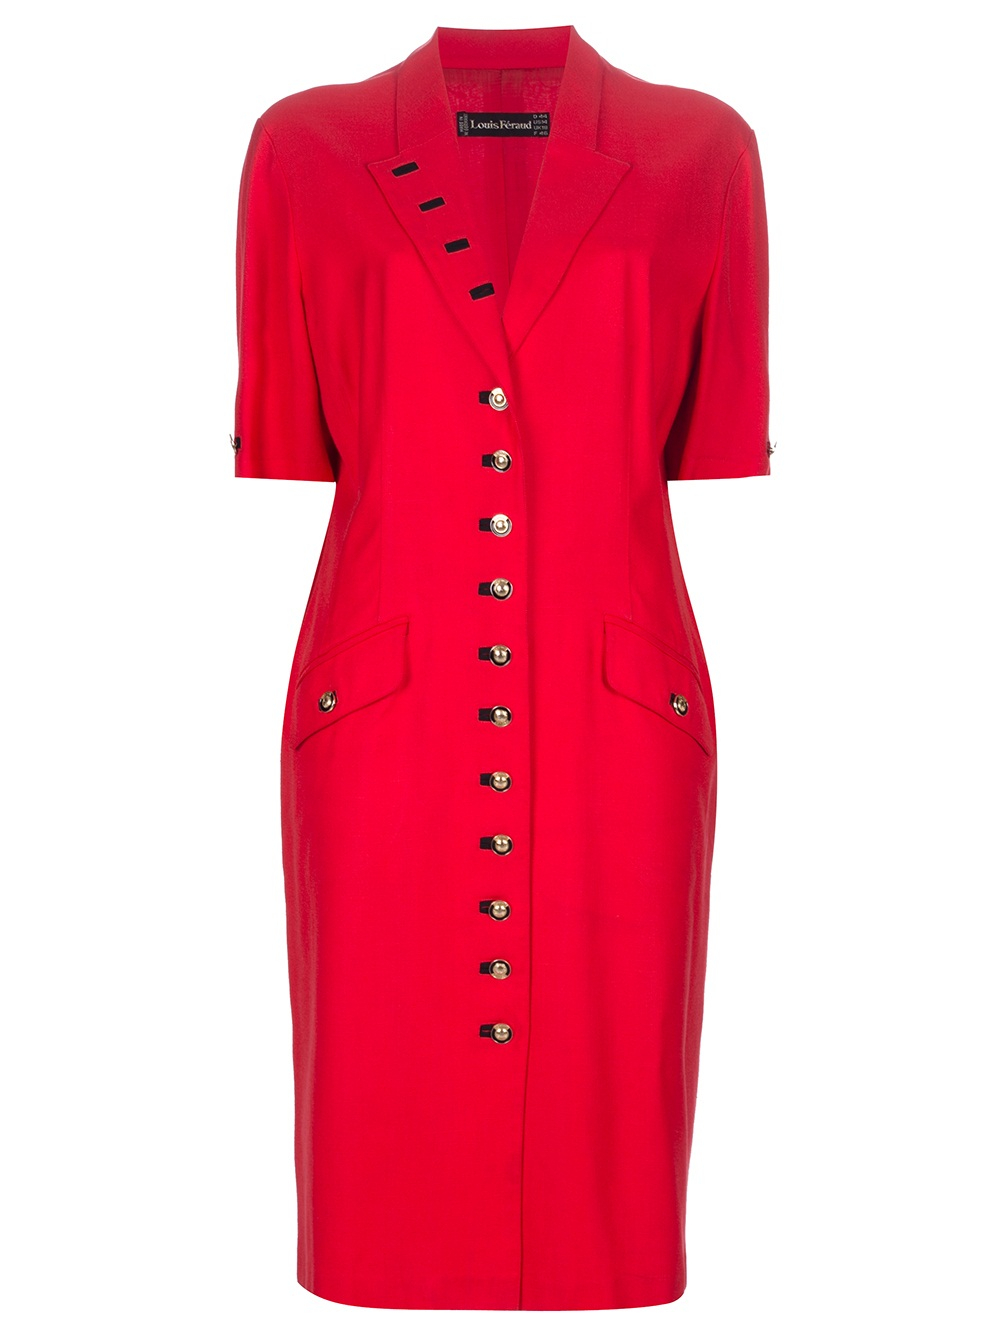 Louis Feraud Vintage Button-Up Dress in Red | Lyst